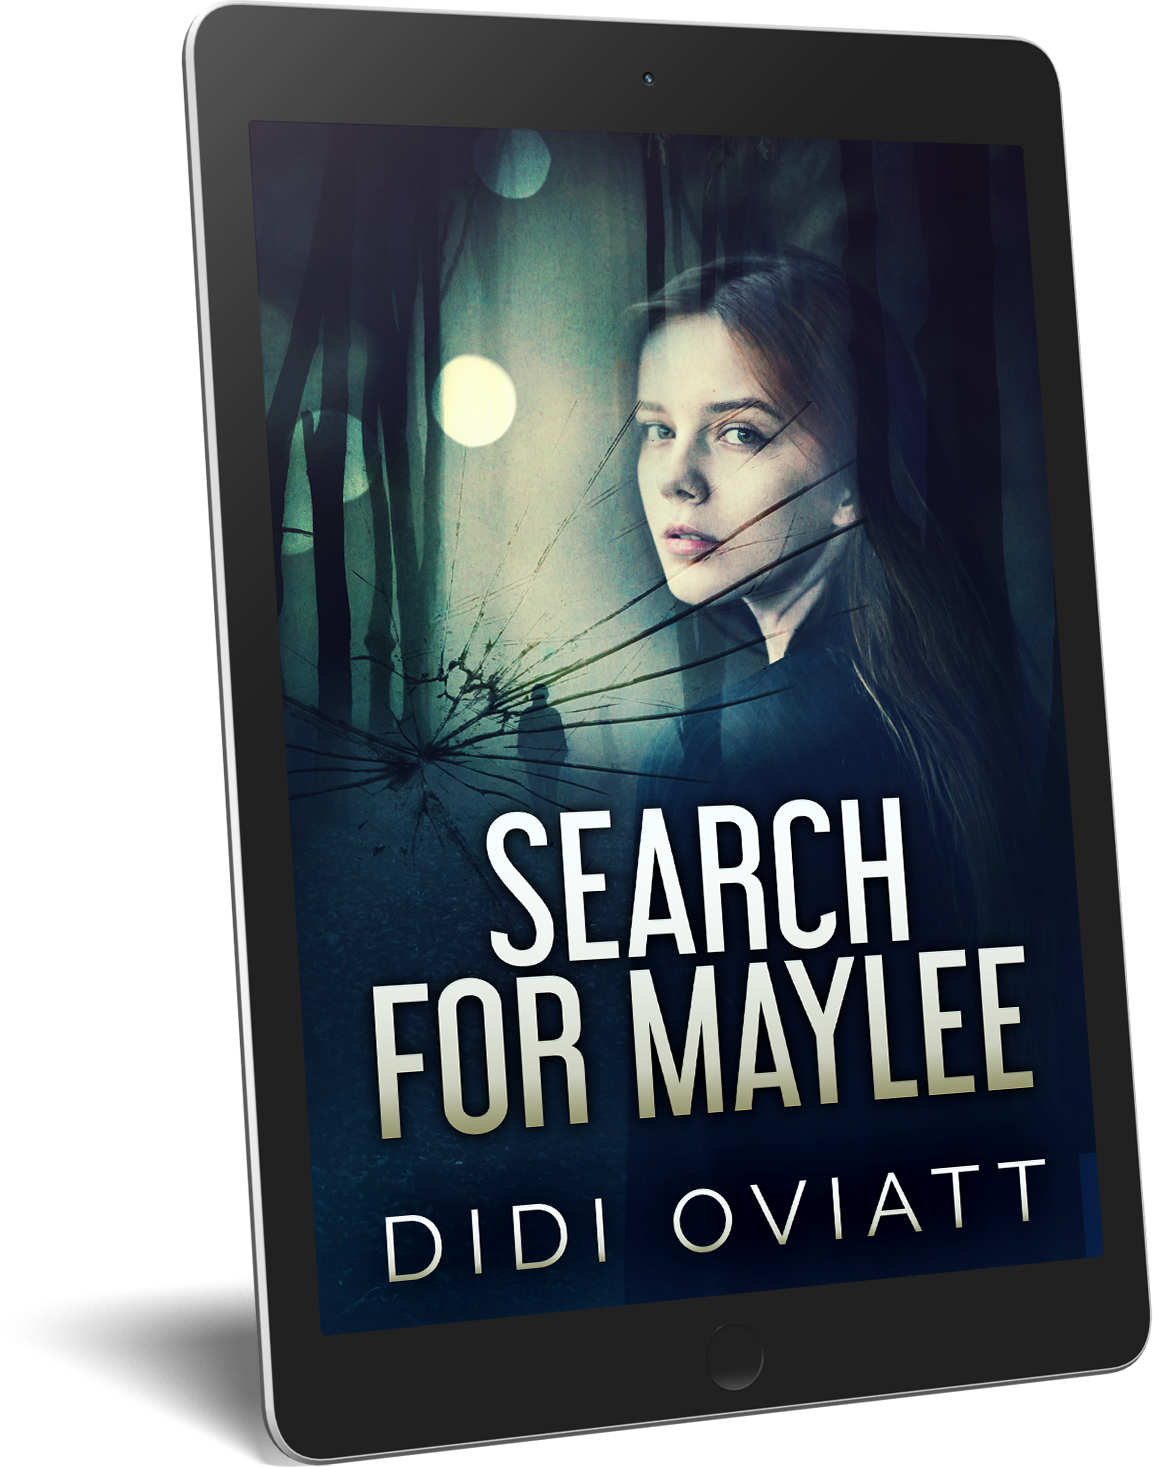 FREE: Search For Maylee by Didi Oviatt